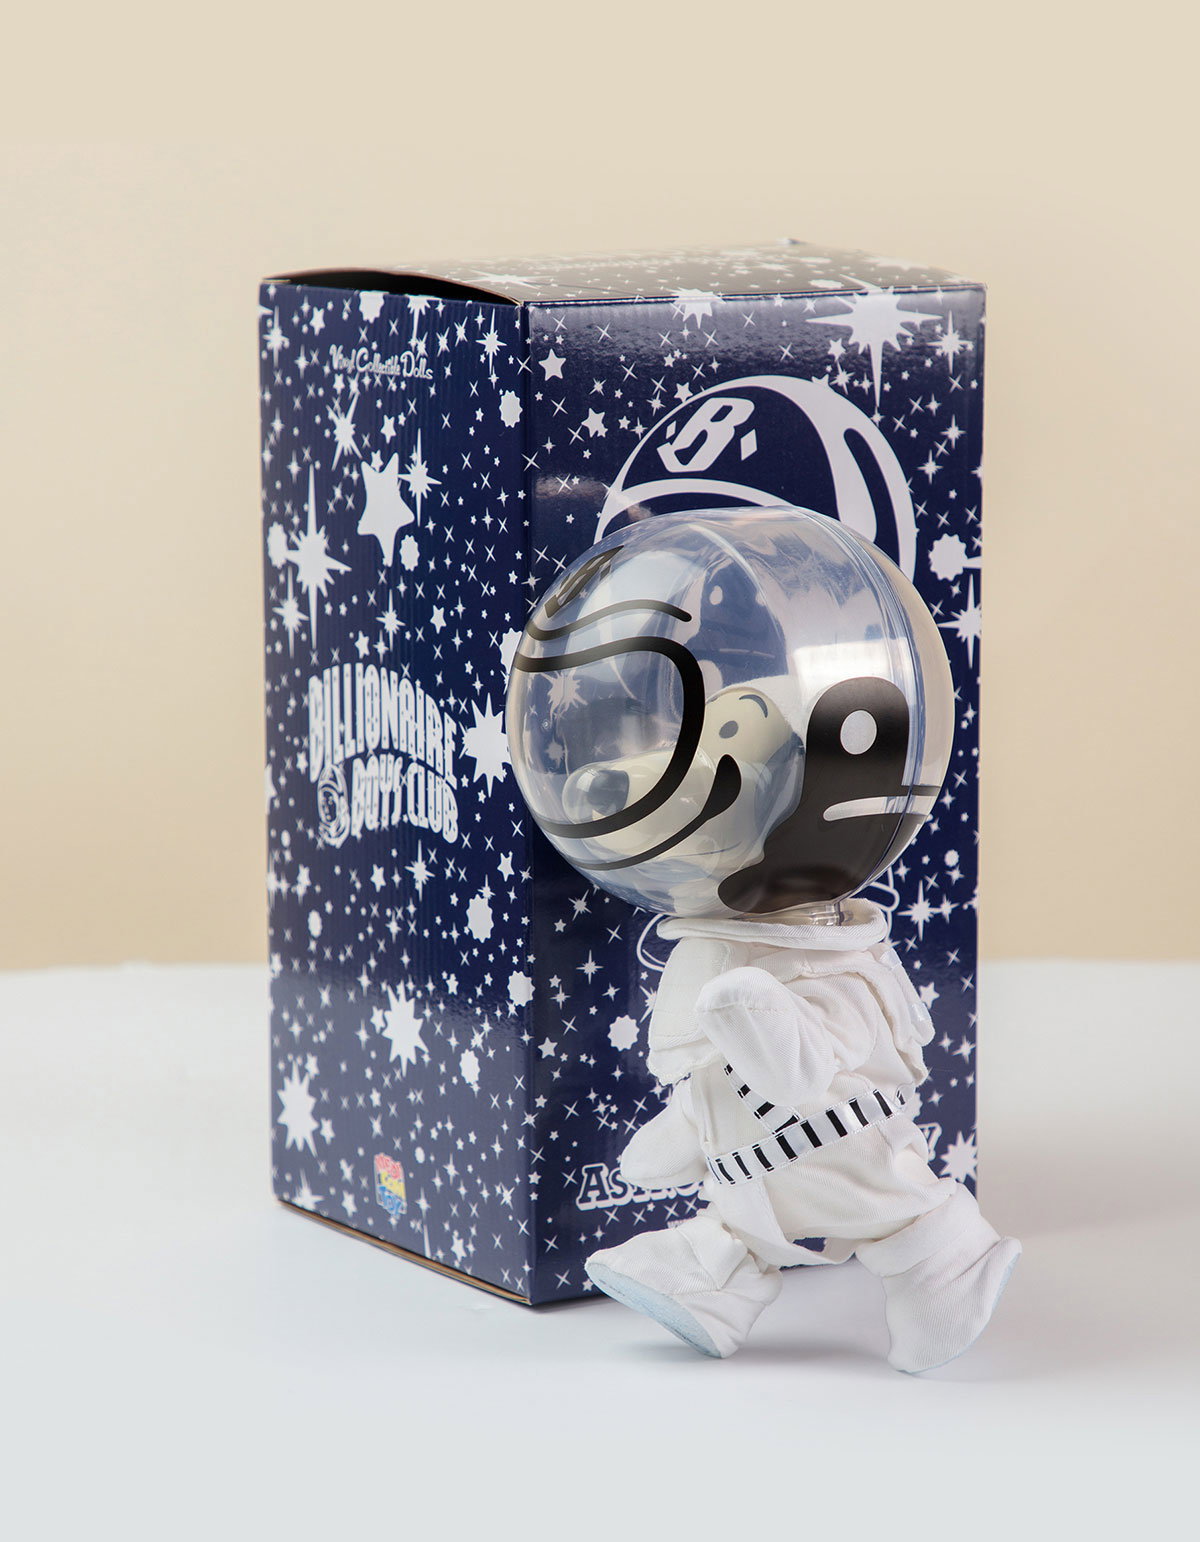 Billionaire Boys Club: Billionaire Boys Club Astronaut Snoopy | Milled